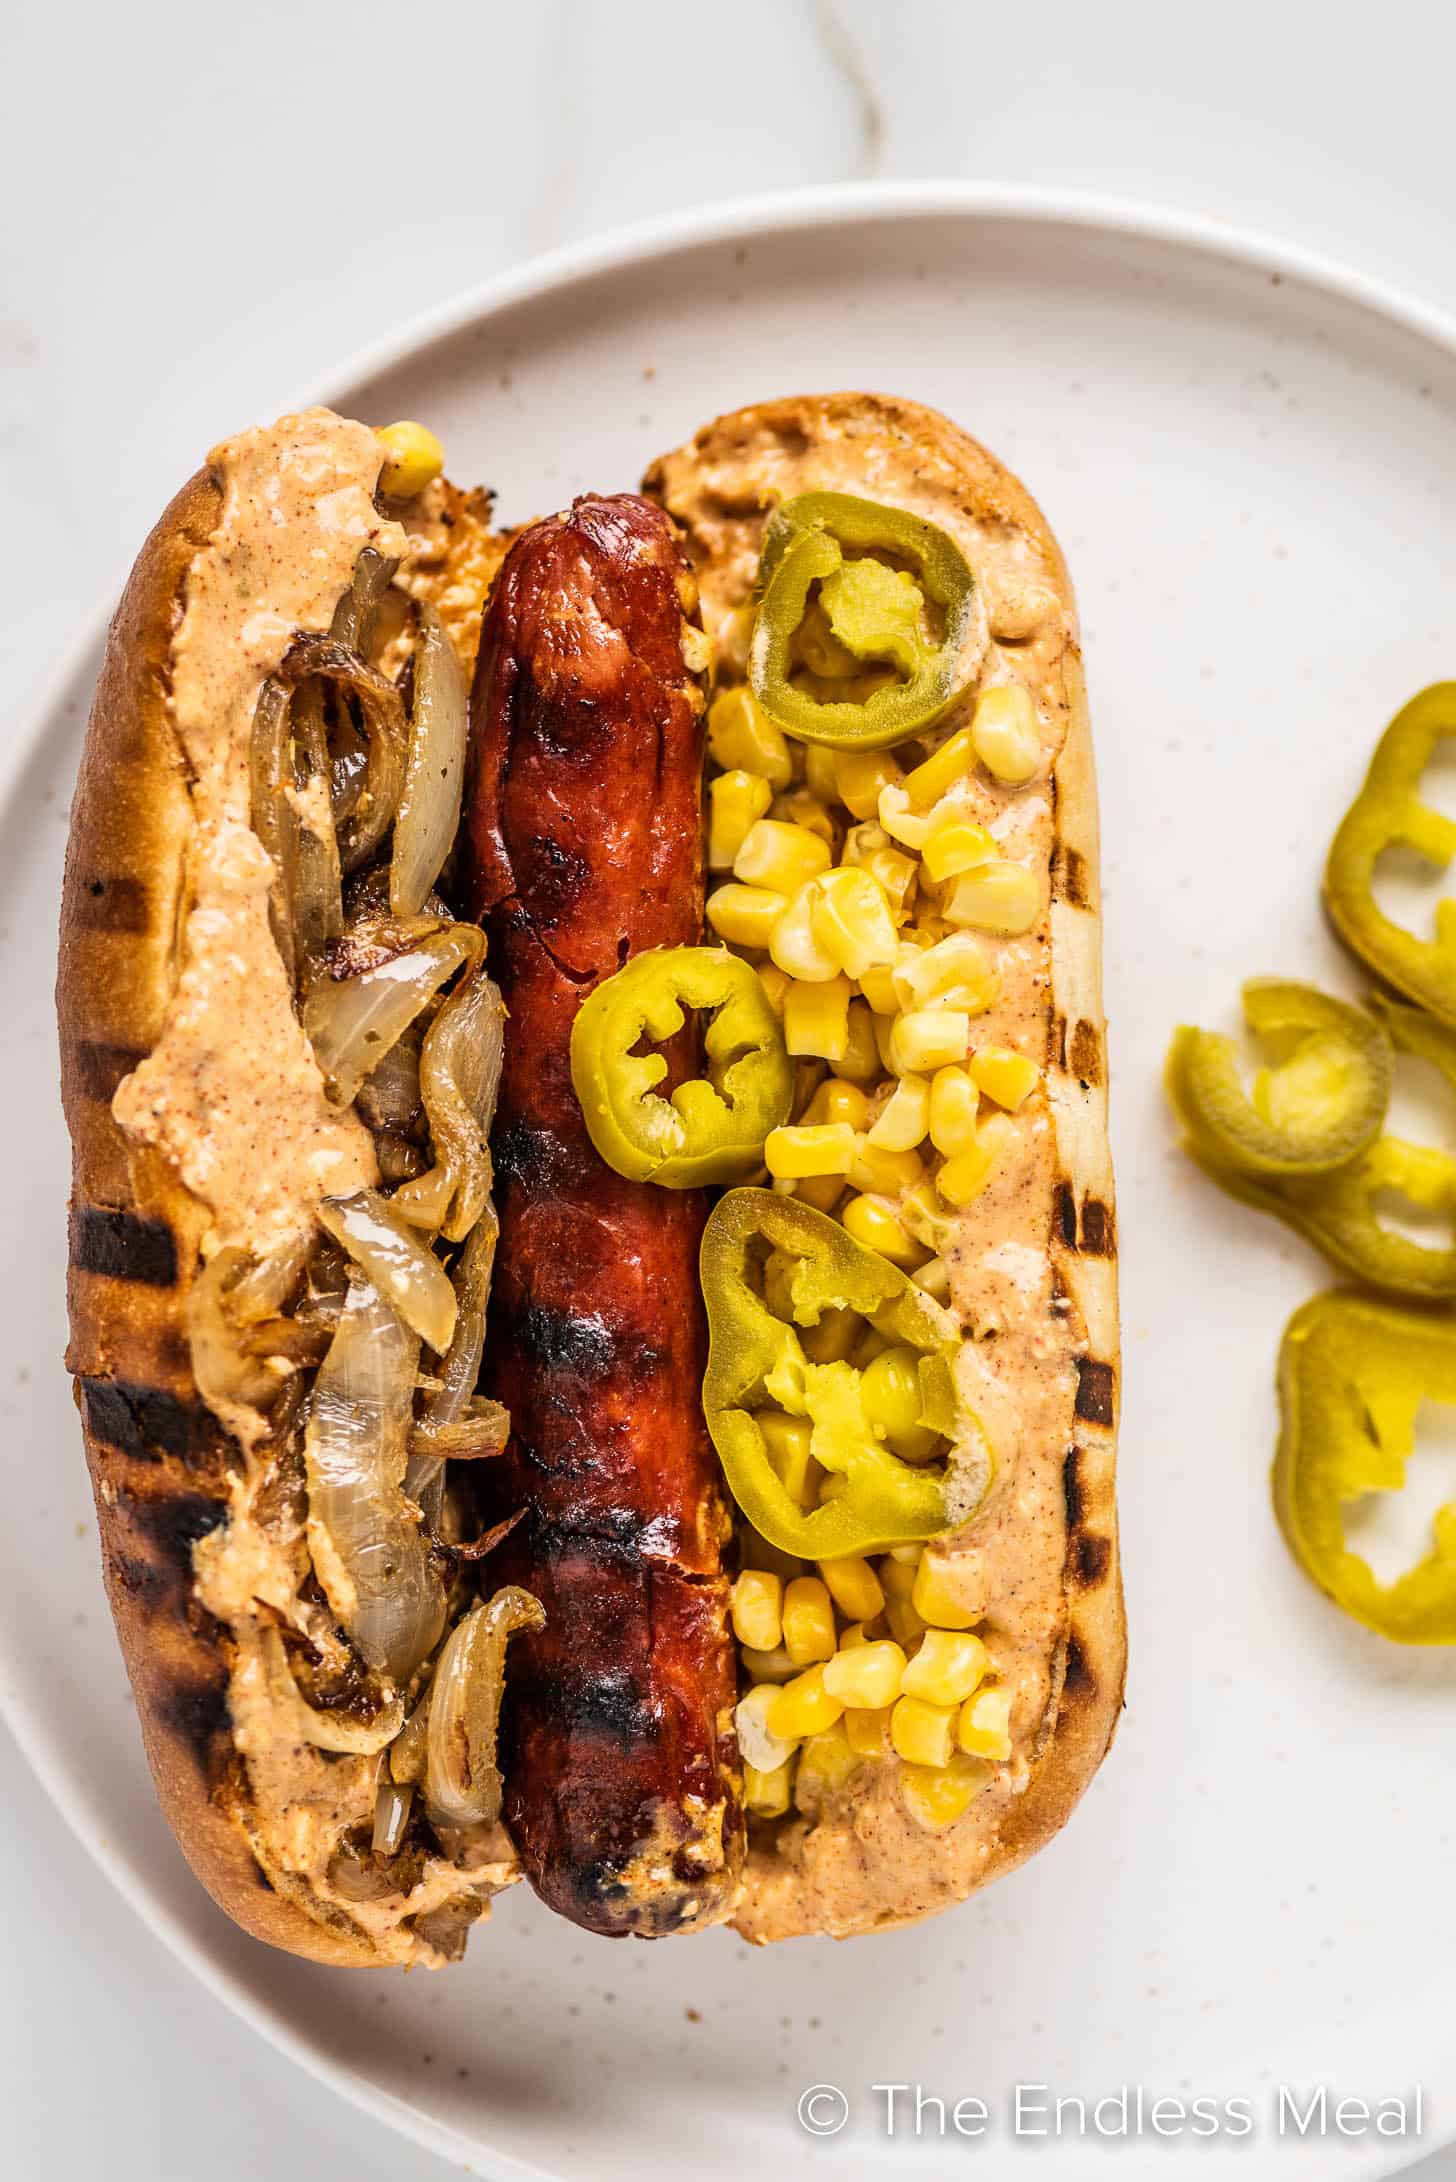 a hot dog with mexican flavors on a plate